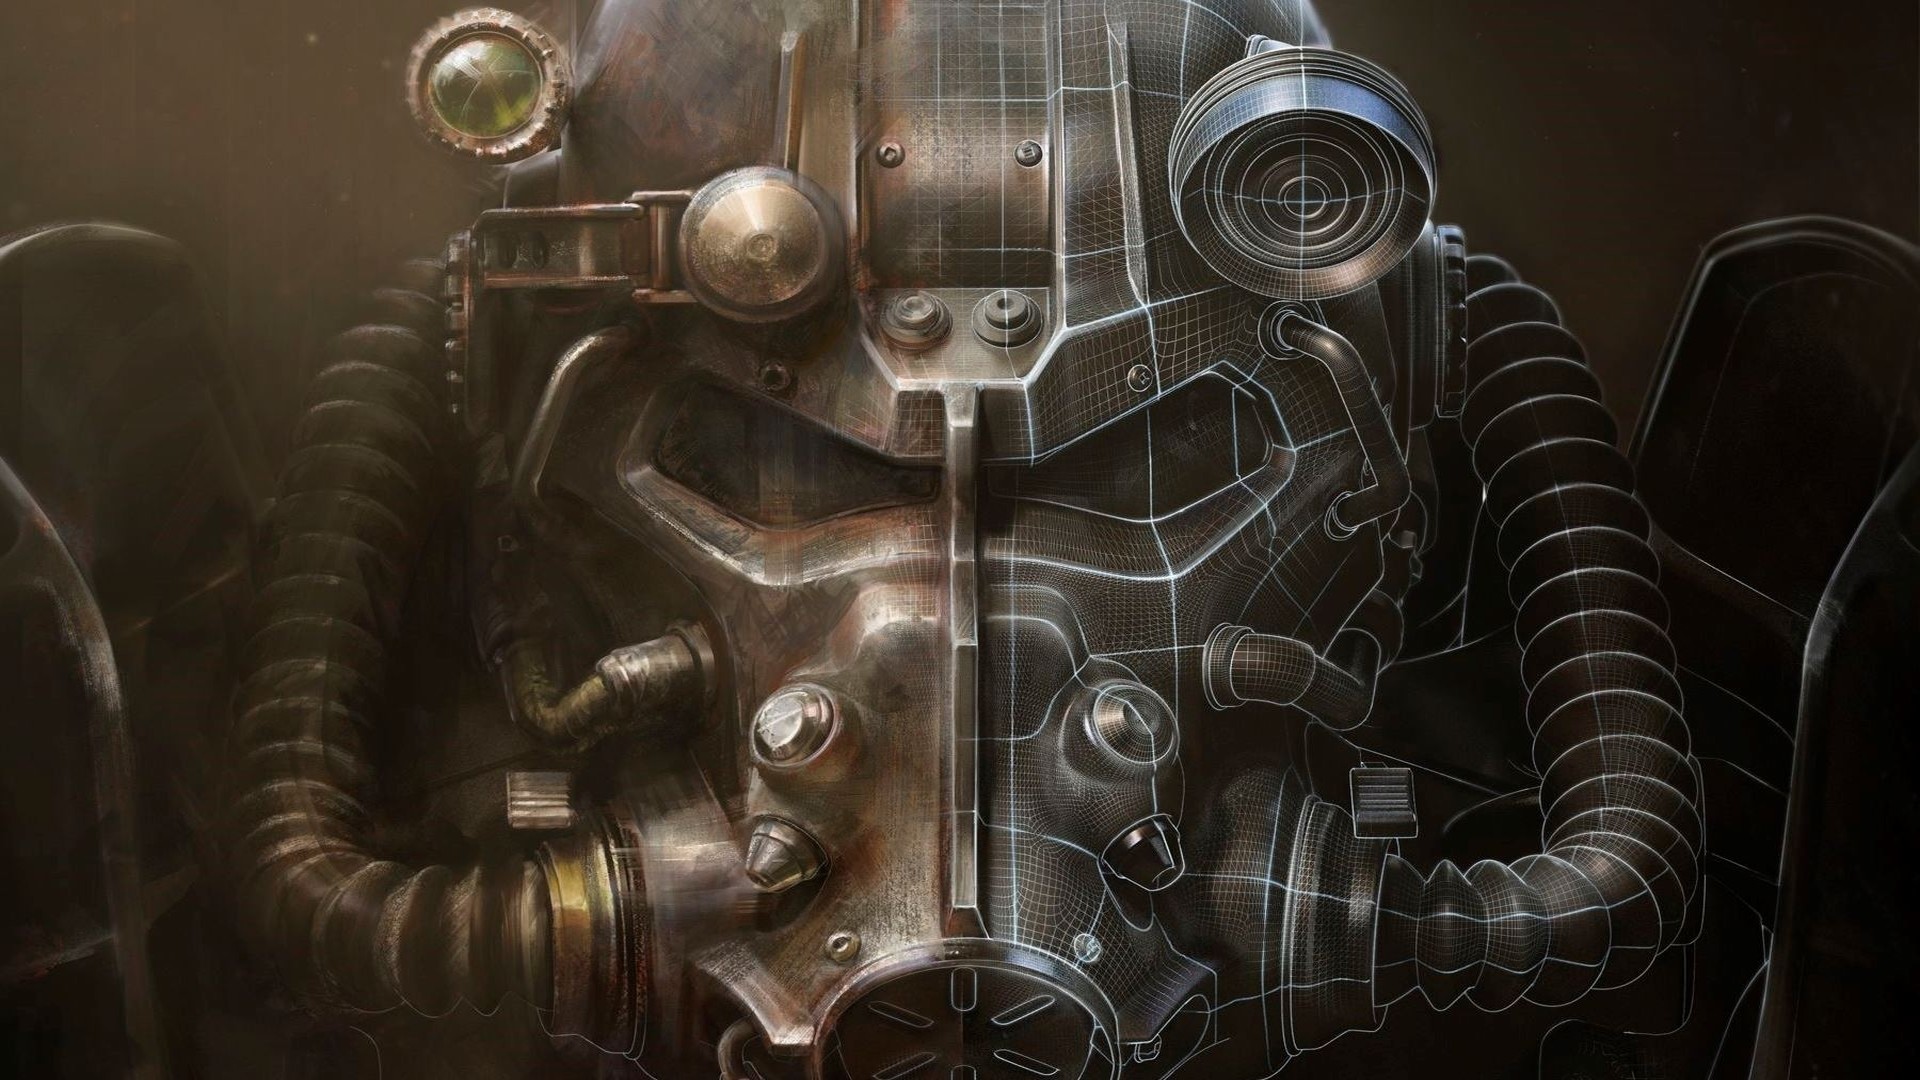 1920x1080 16 HD Fallout 4 Desktop Wallpapers For Free Download